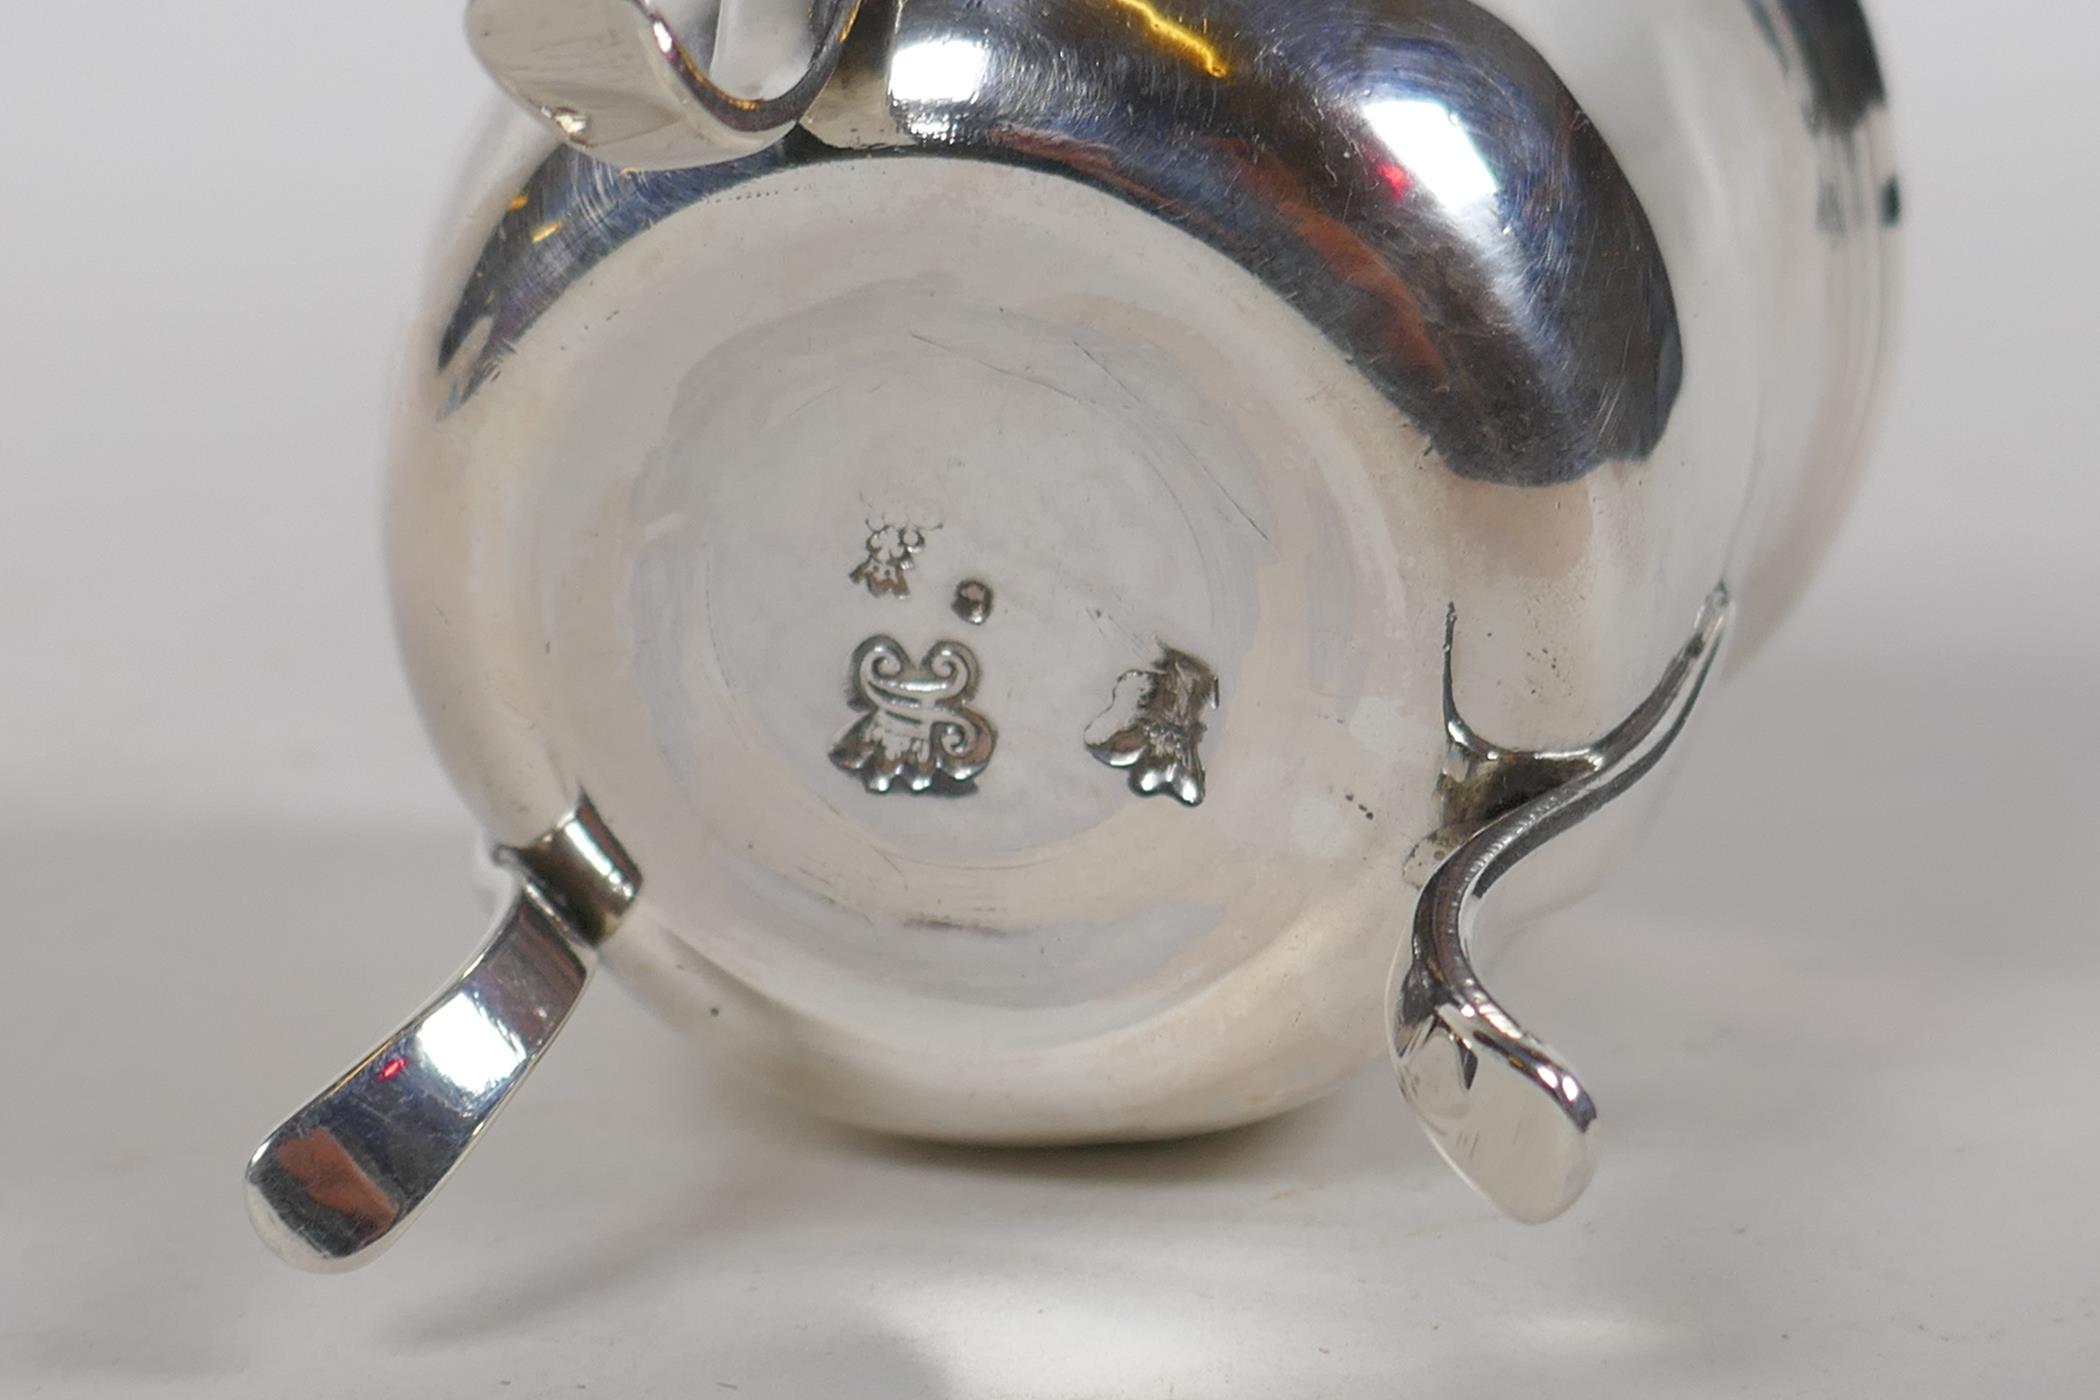 An antique continental silver pot raised on tripod supports, 80.8g, probably French - Image 4 of 5